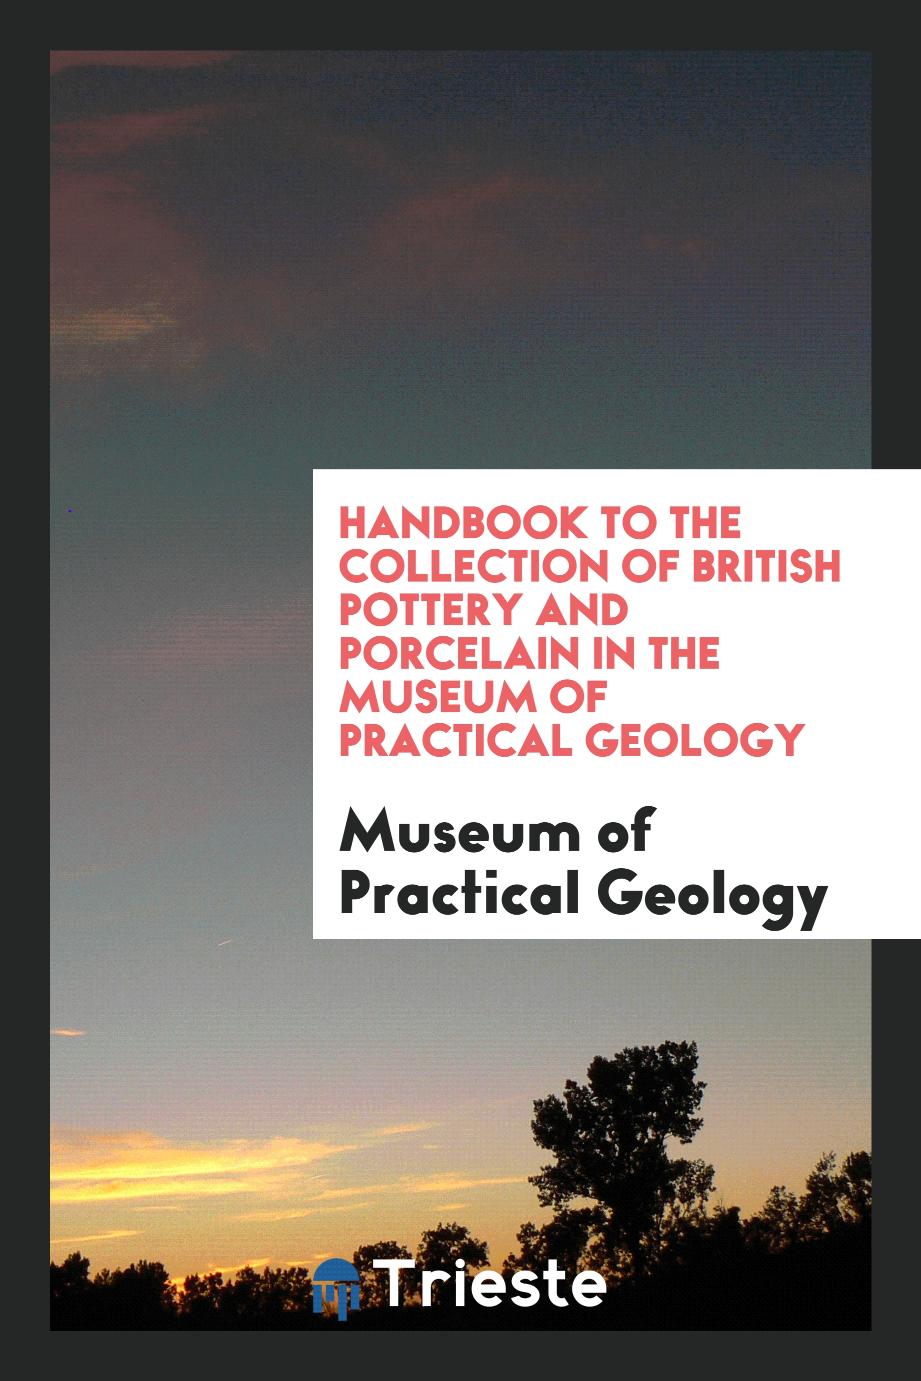 Handbook to the Collection of British Pottery and Porcelain in the Museum of Practical Geology